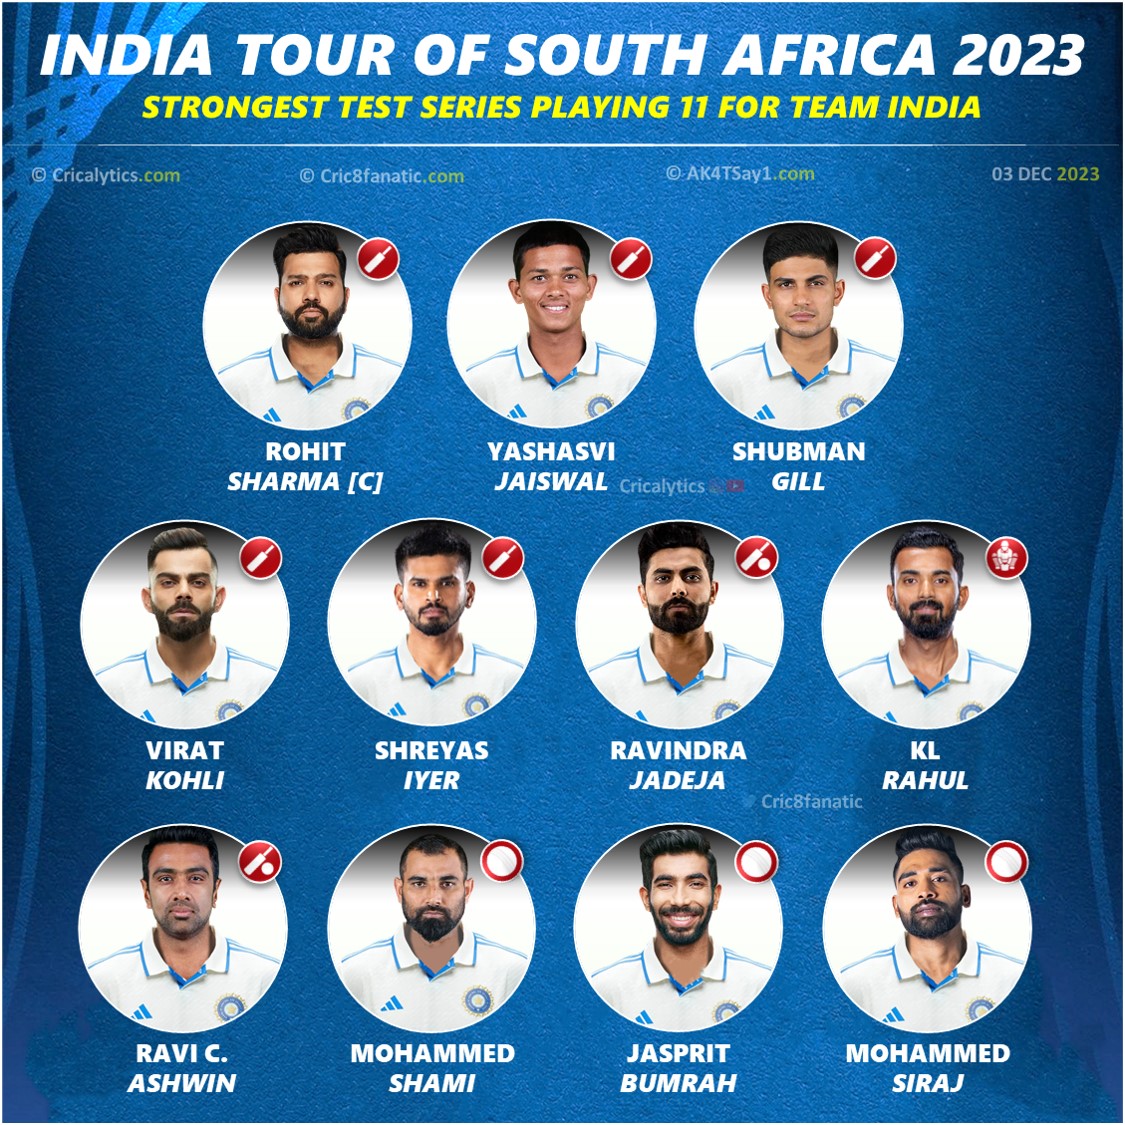 India vs South Africa 2023 Confirmed Test Series Playing 11